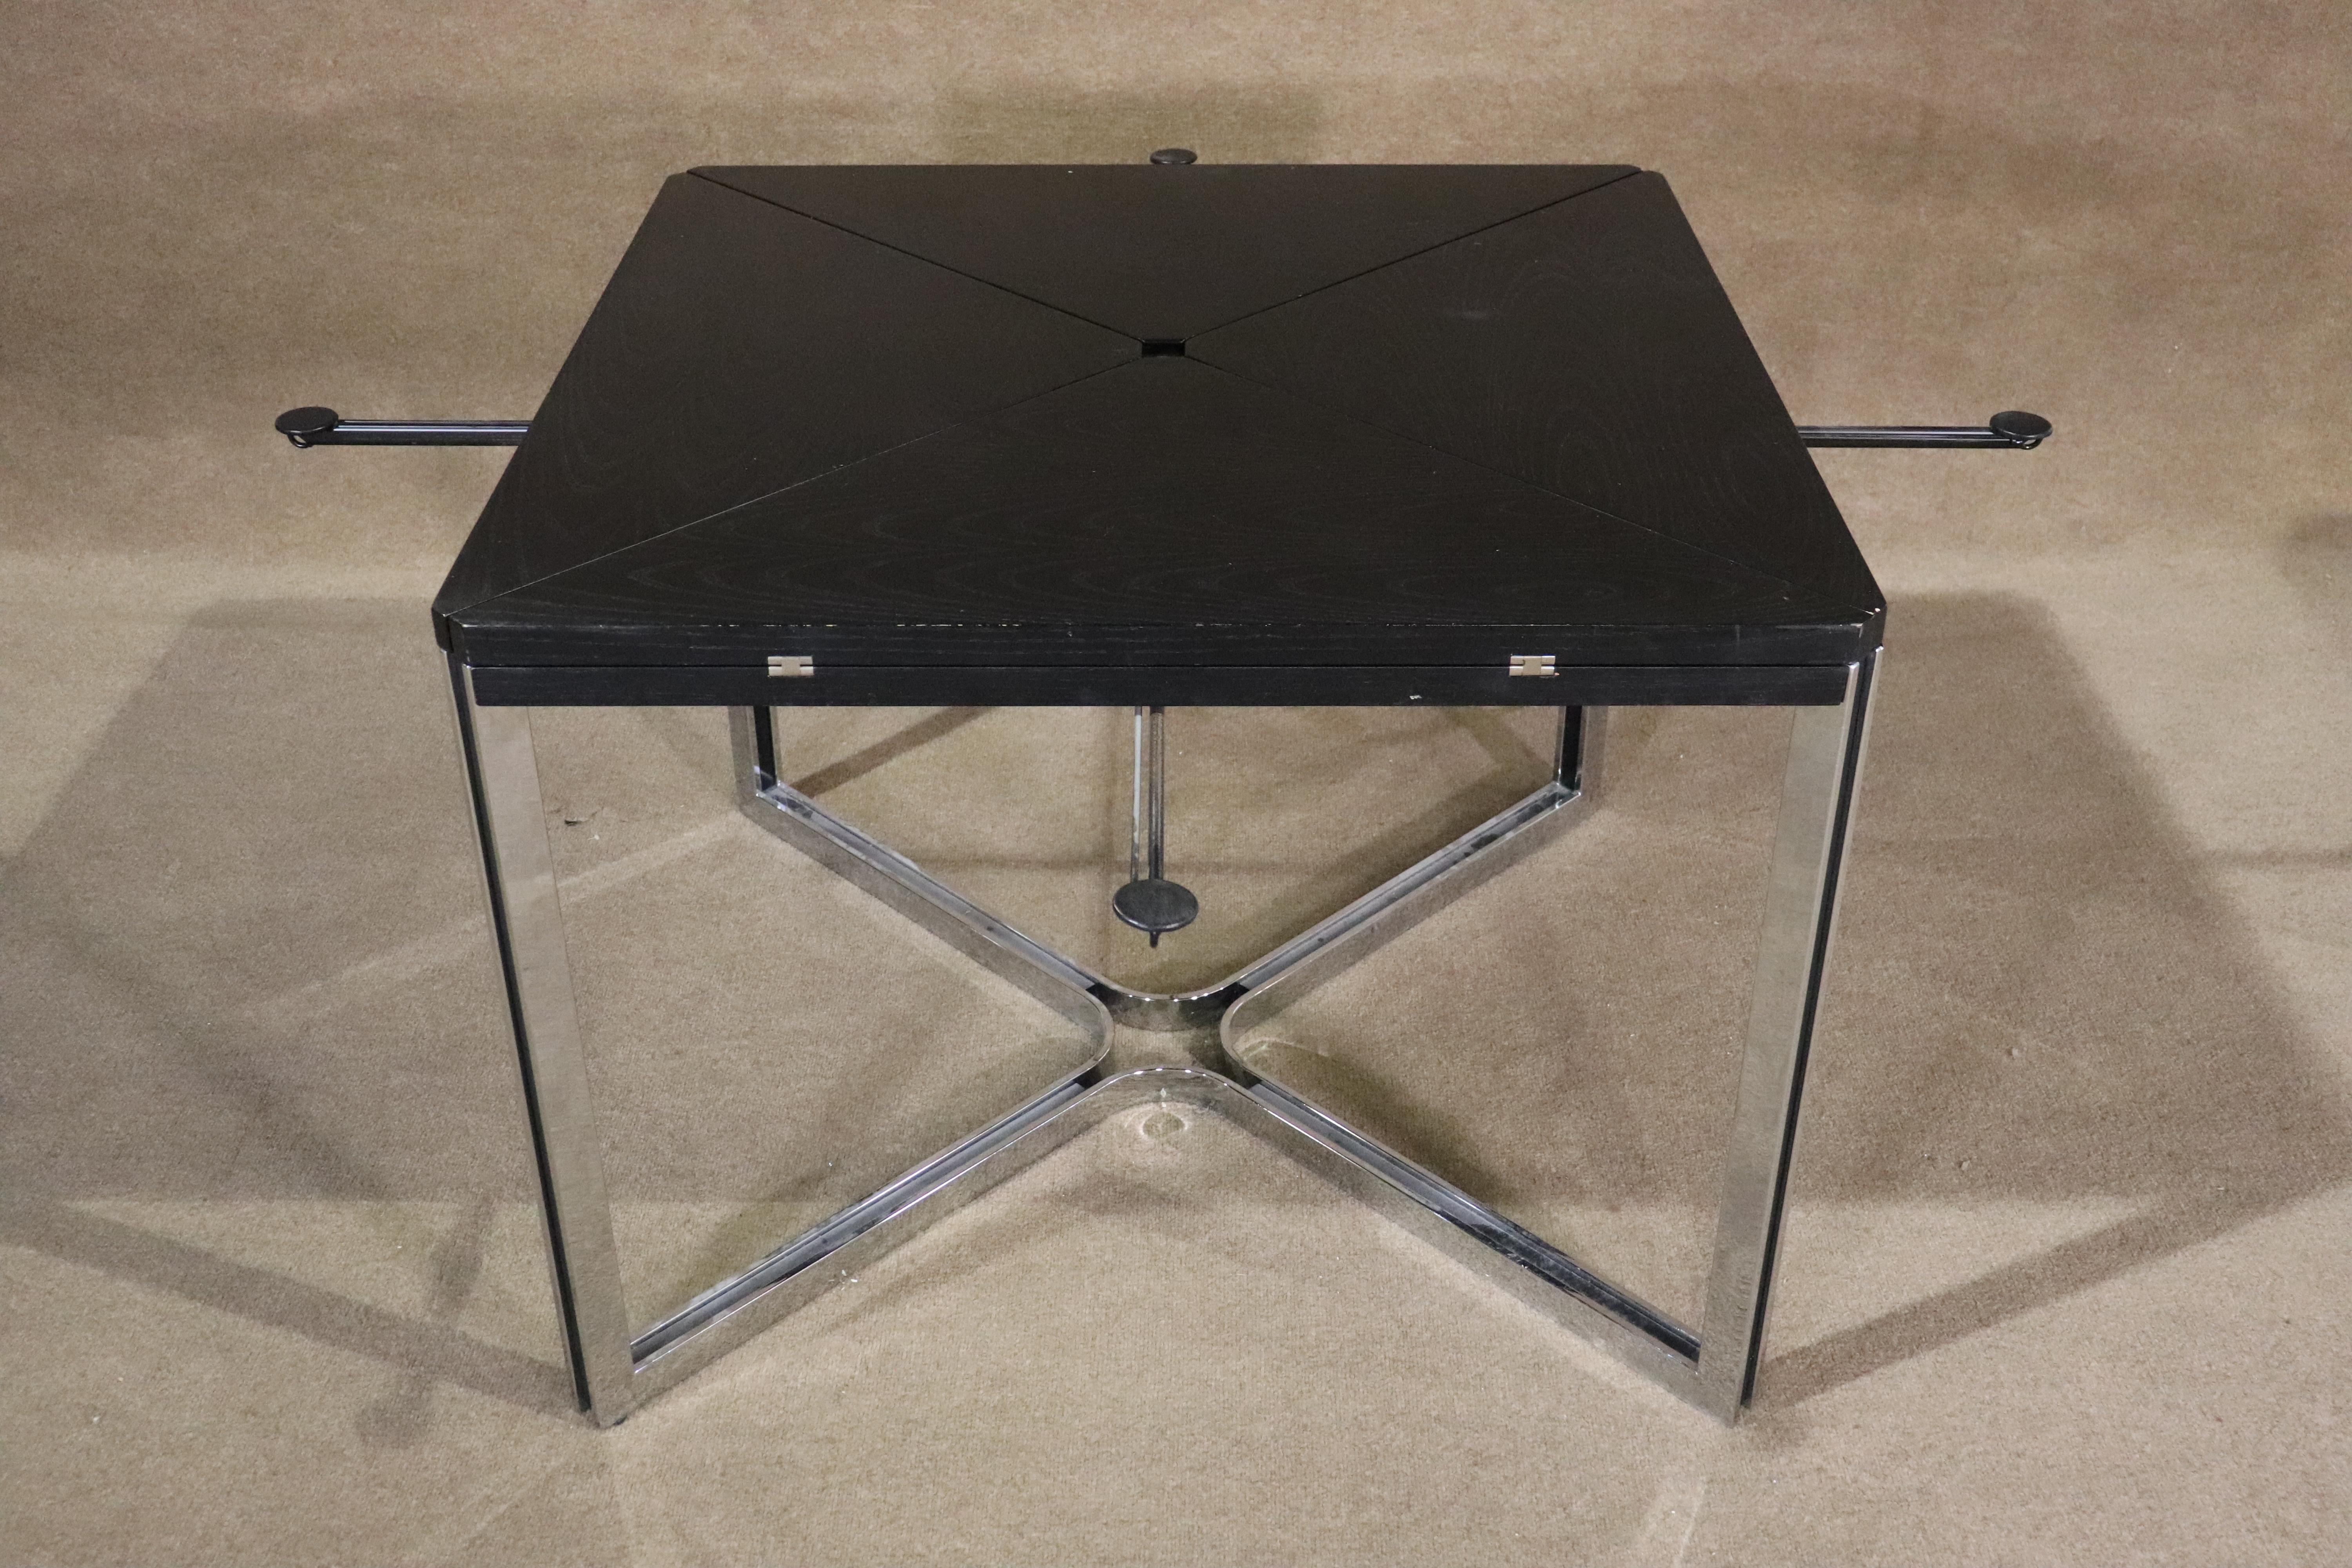 Modern style table with folding leaves and polished chrome base. Great style with 'X' shaped base and exposed hinges.
Width: 39.5-55.5 
Please confirm location NY or NJ.